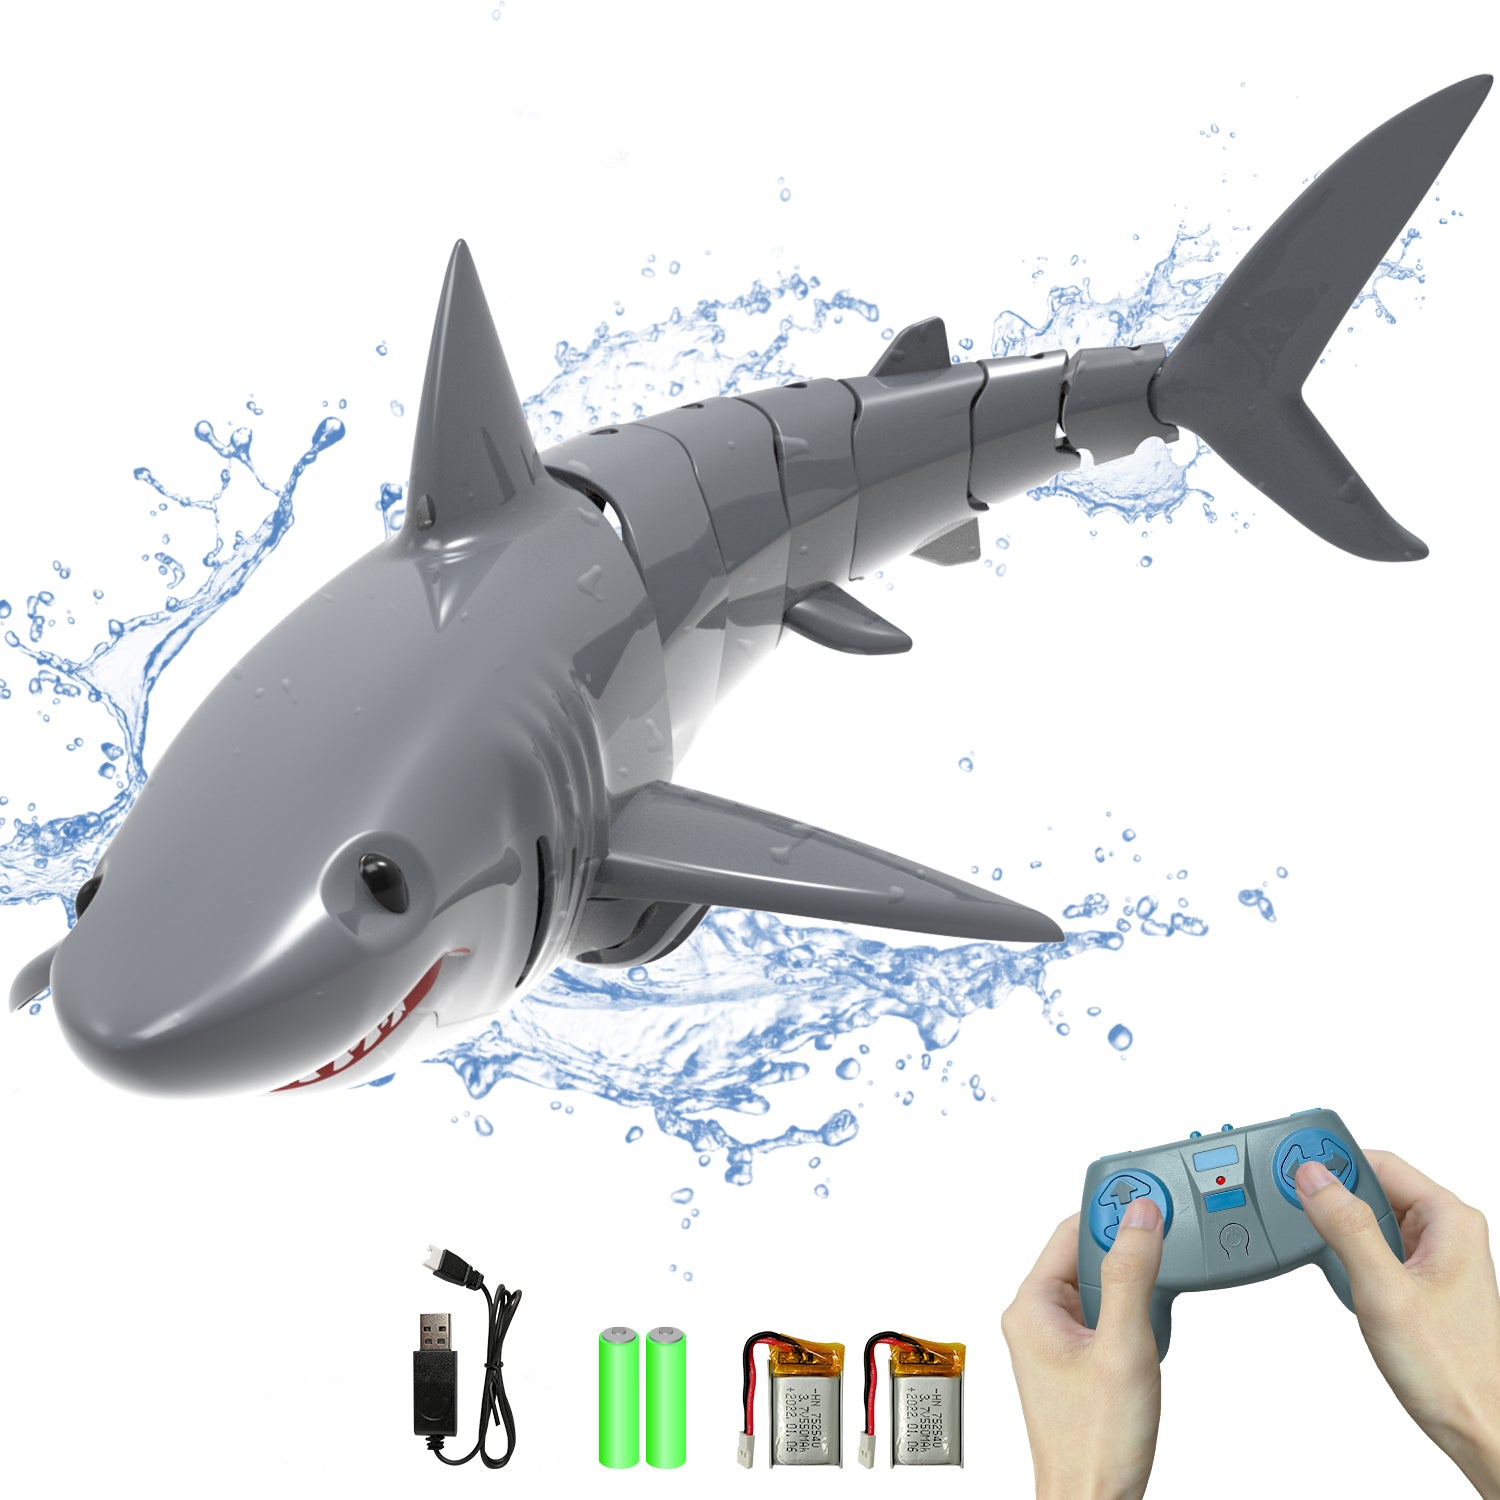 VOLANTEXRC RC Shark Toys Great Gift For Kids.